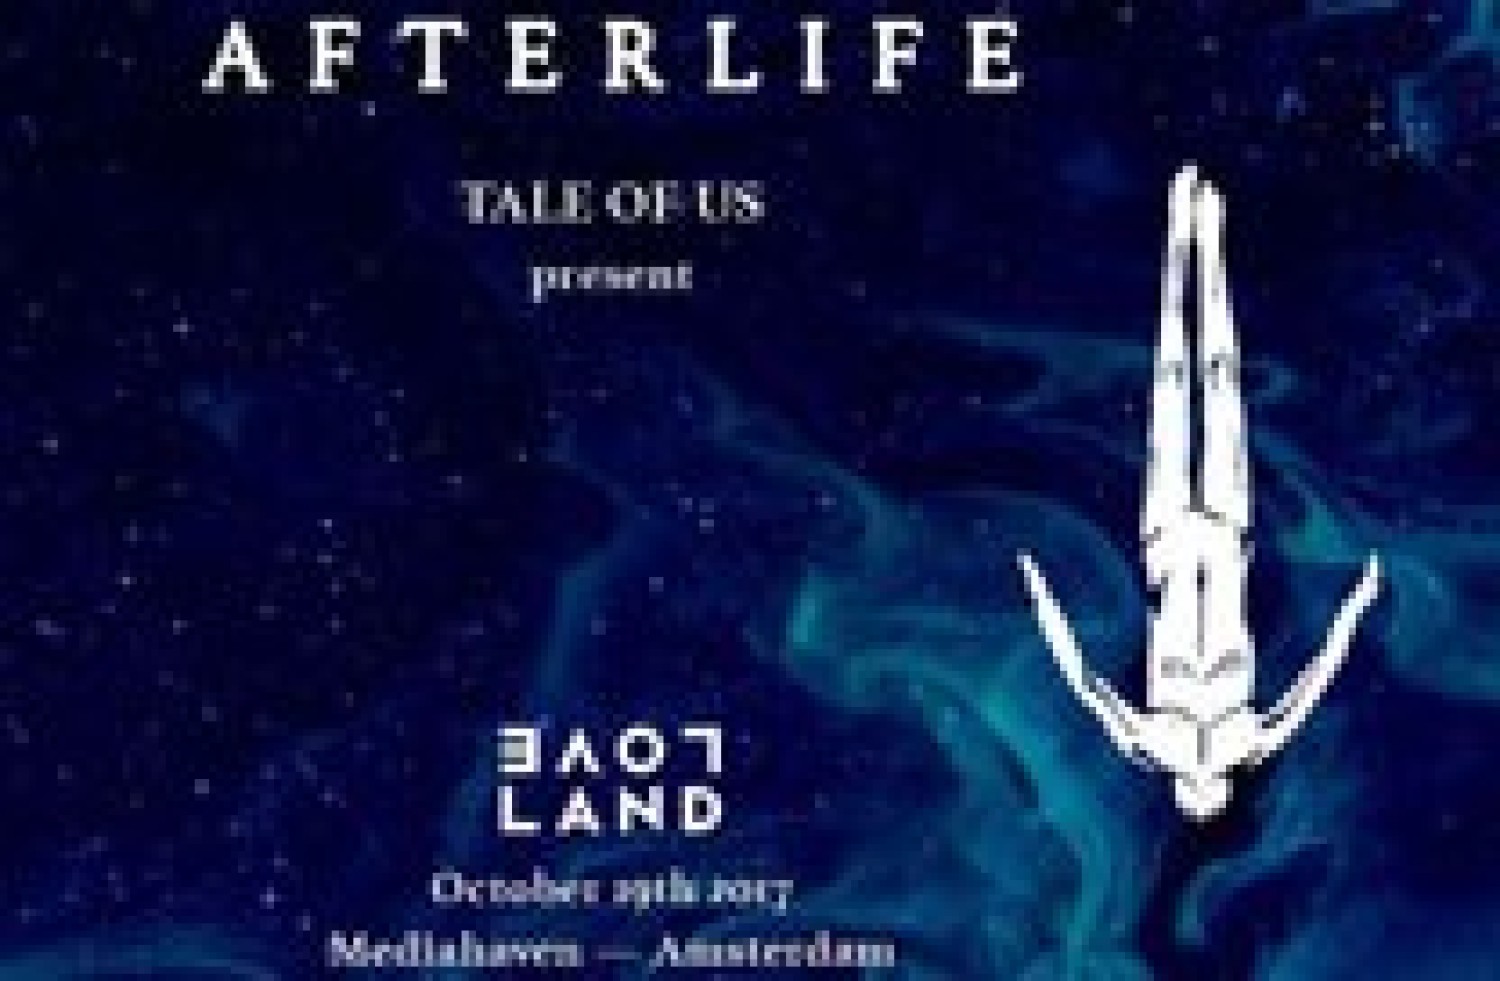 Party report: Afterlife x Loveland, Amsterdam (19-10-2017)